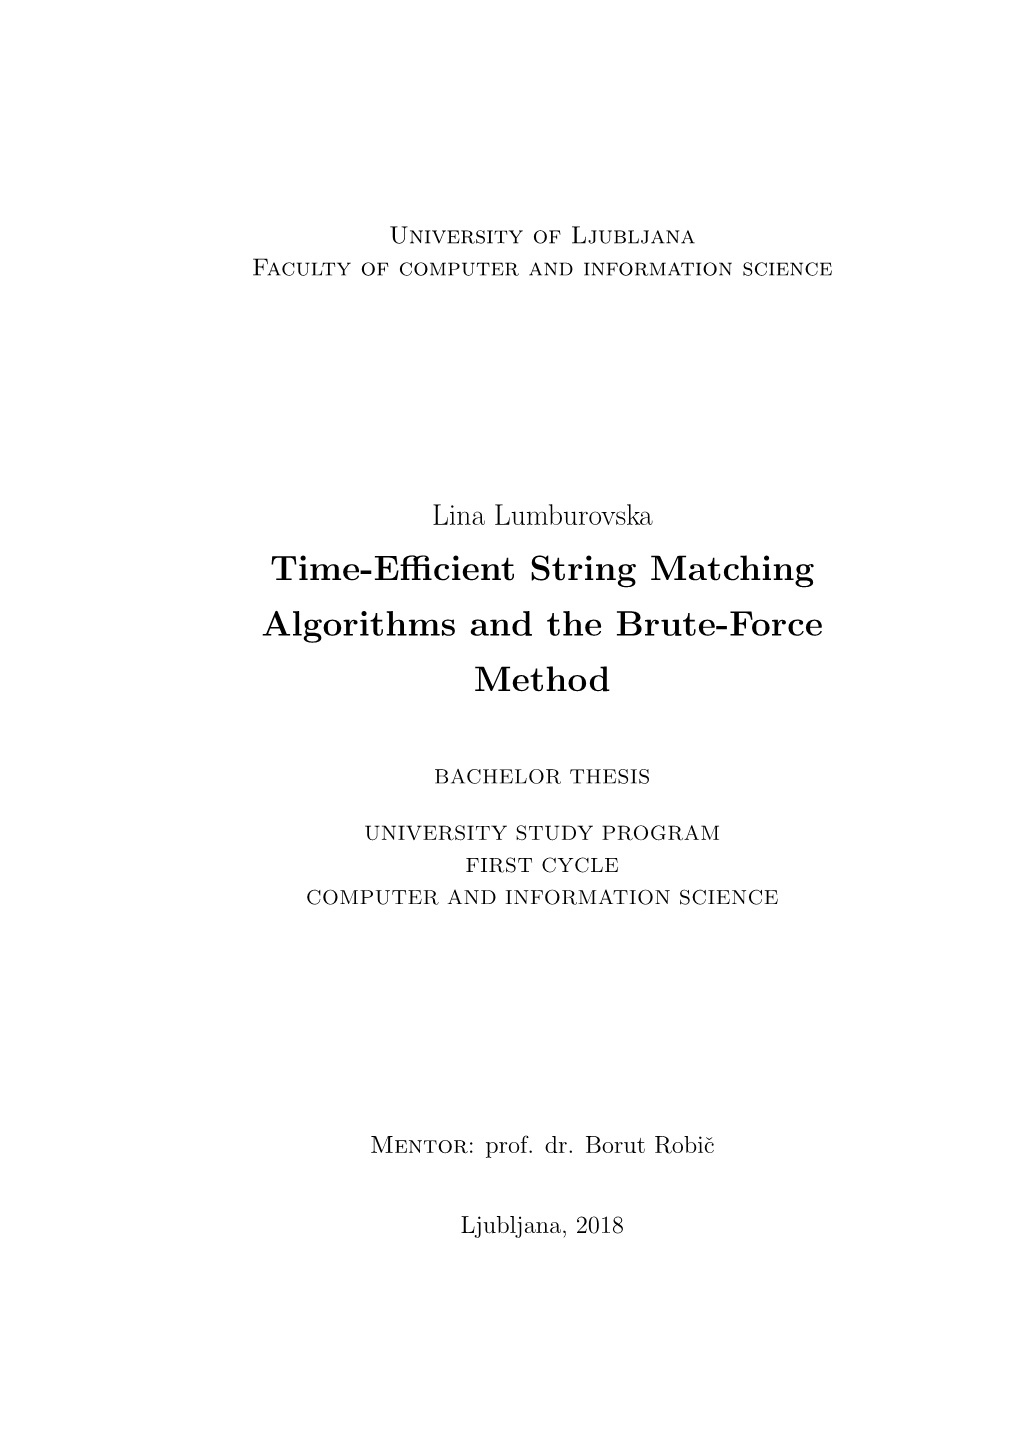 Time-Efficient String Matching Algorithms and the Brute-Force